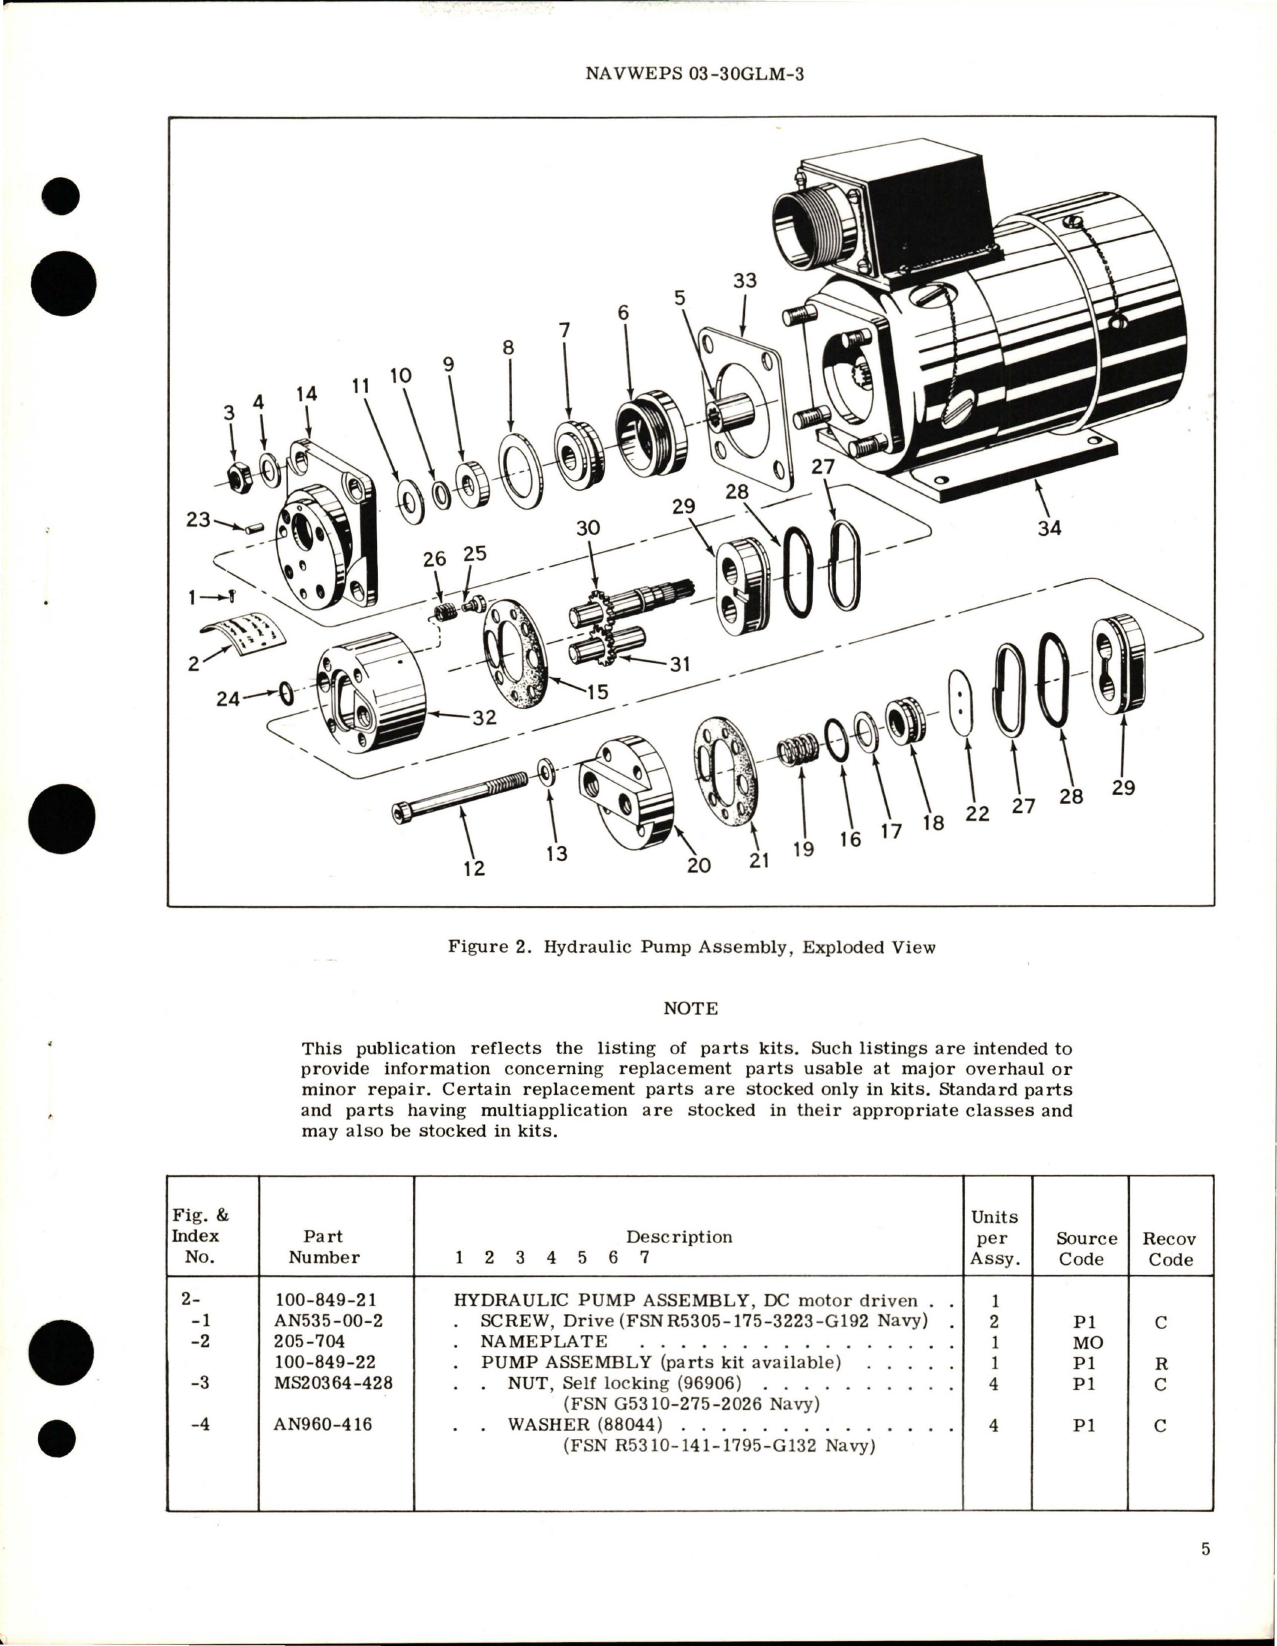 Sample page 5 from AirCorps Library document: Overhaul Instructions with Parts Breakdown for Motor Driven Hydraulic Pump - Part 100-849-21